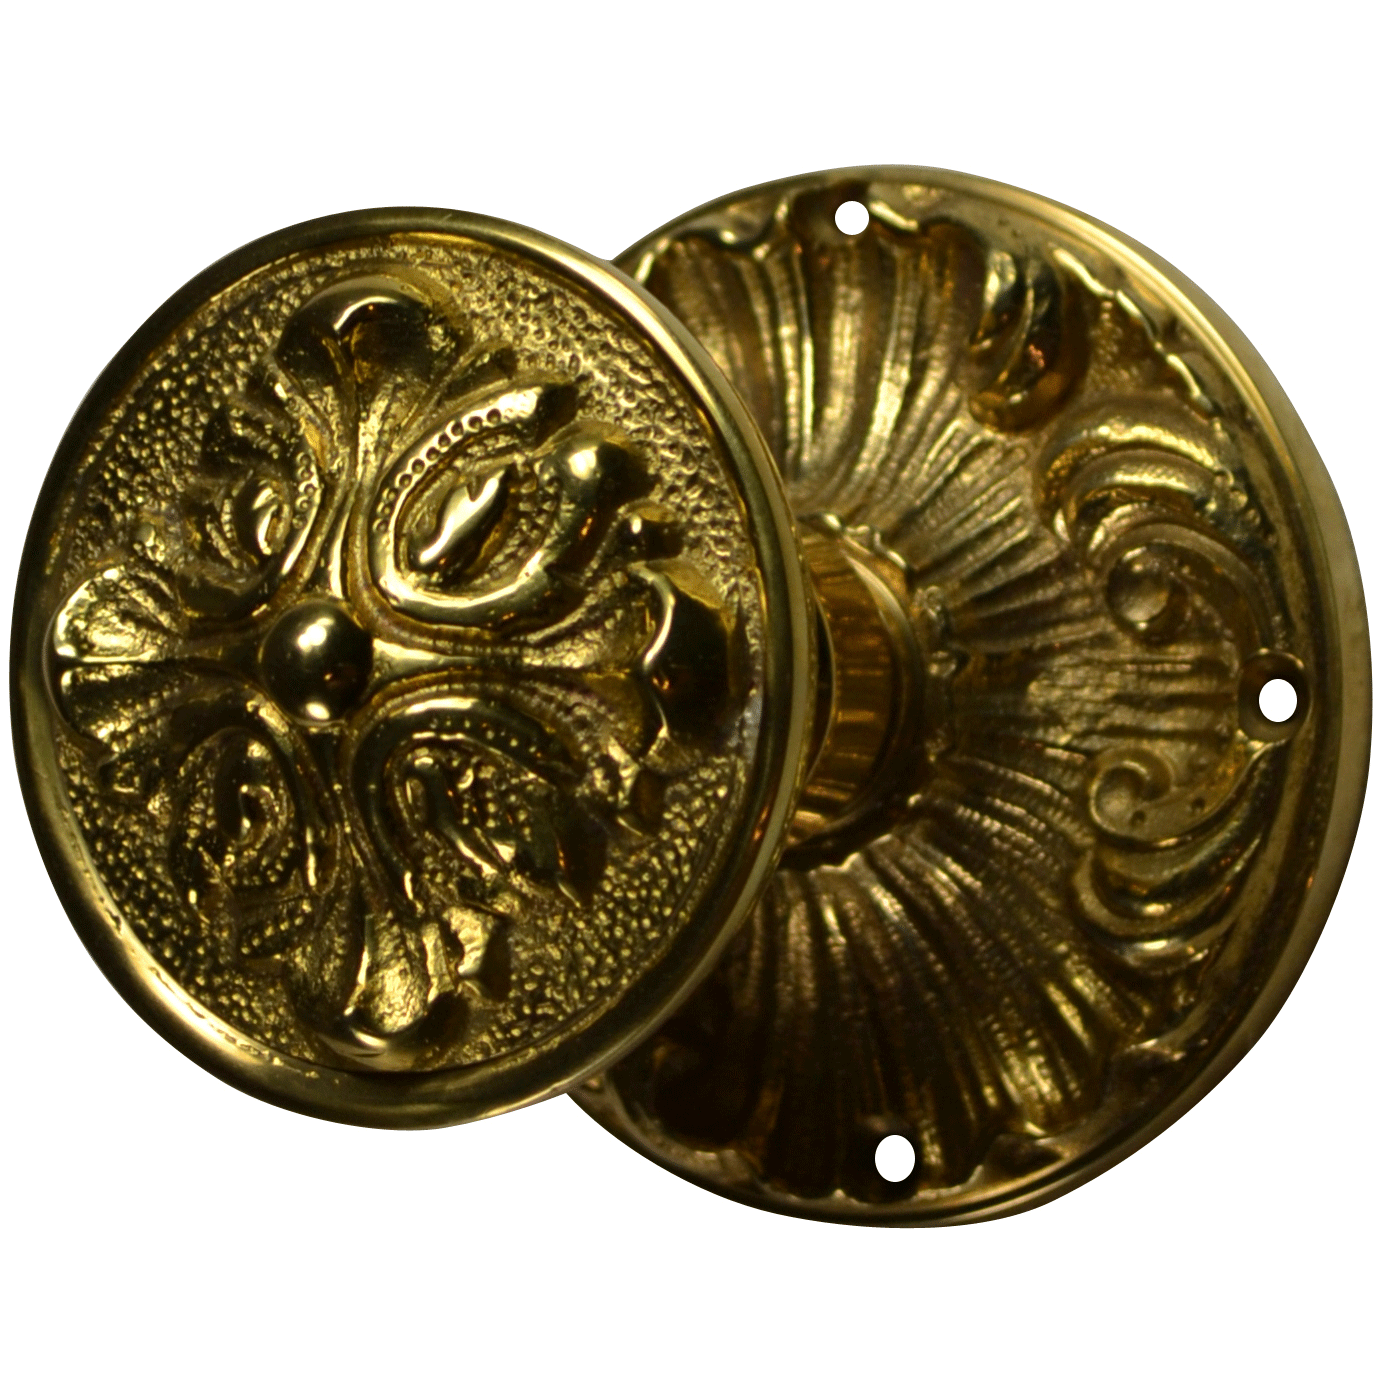 Solid Brass Romanesque Door Knob Set (Several Finishes Available)